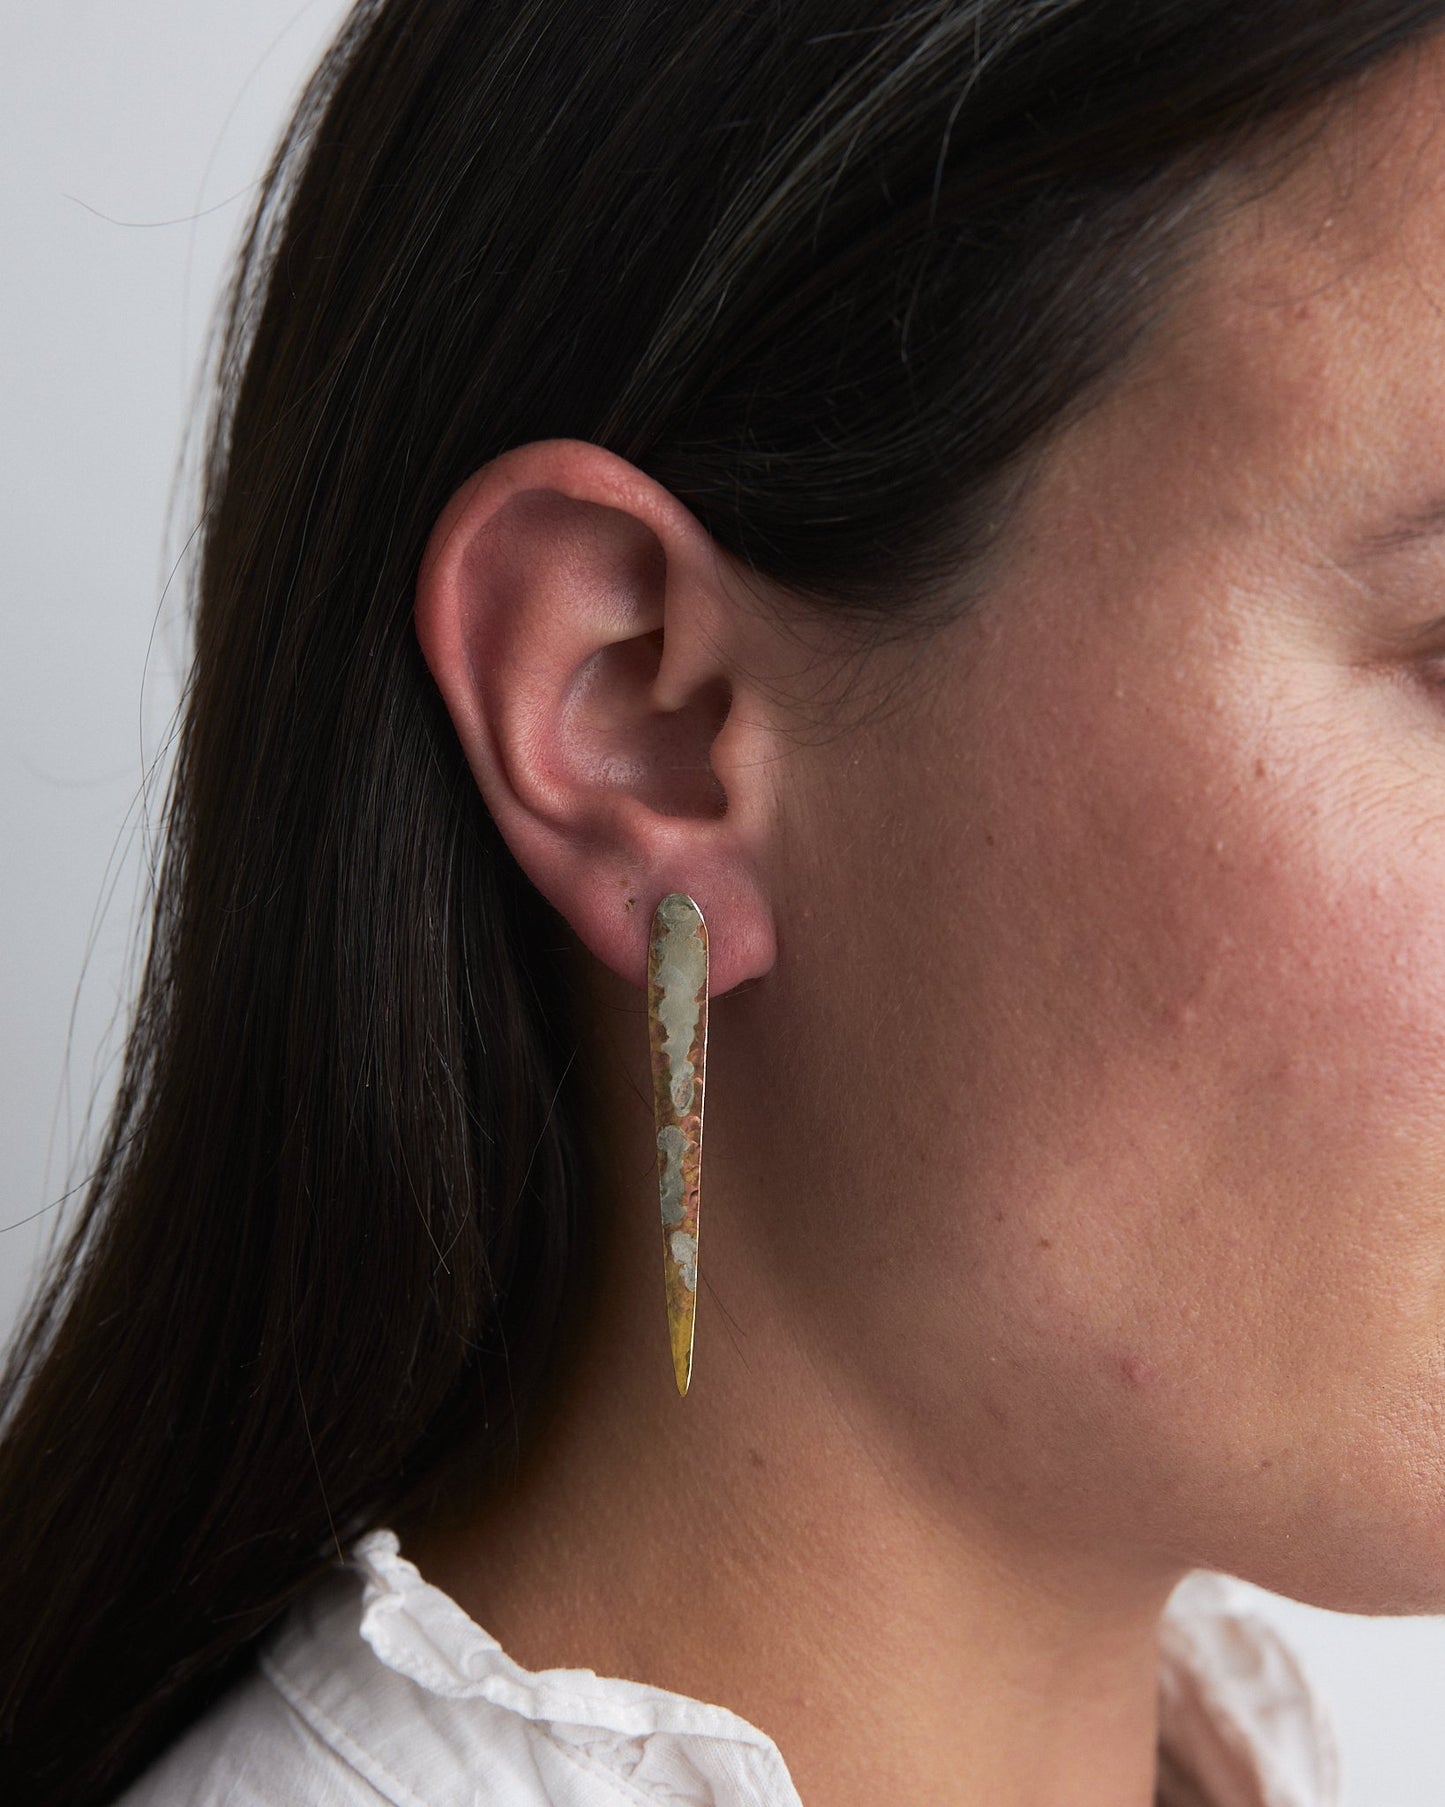 Sea Lichen Shards: handmade earrings in recycled brass with a mother silver patina inspired by lichen on the rocks by the sea. Worn by a model.